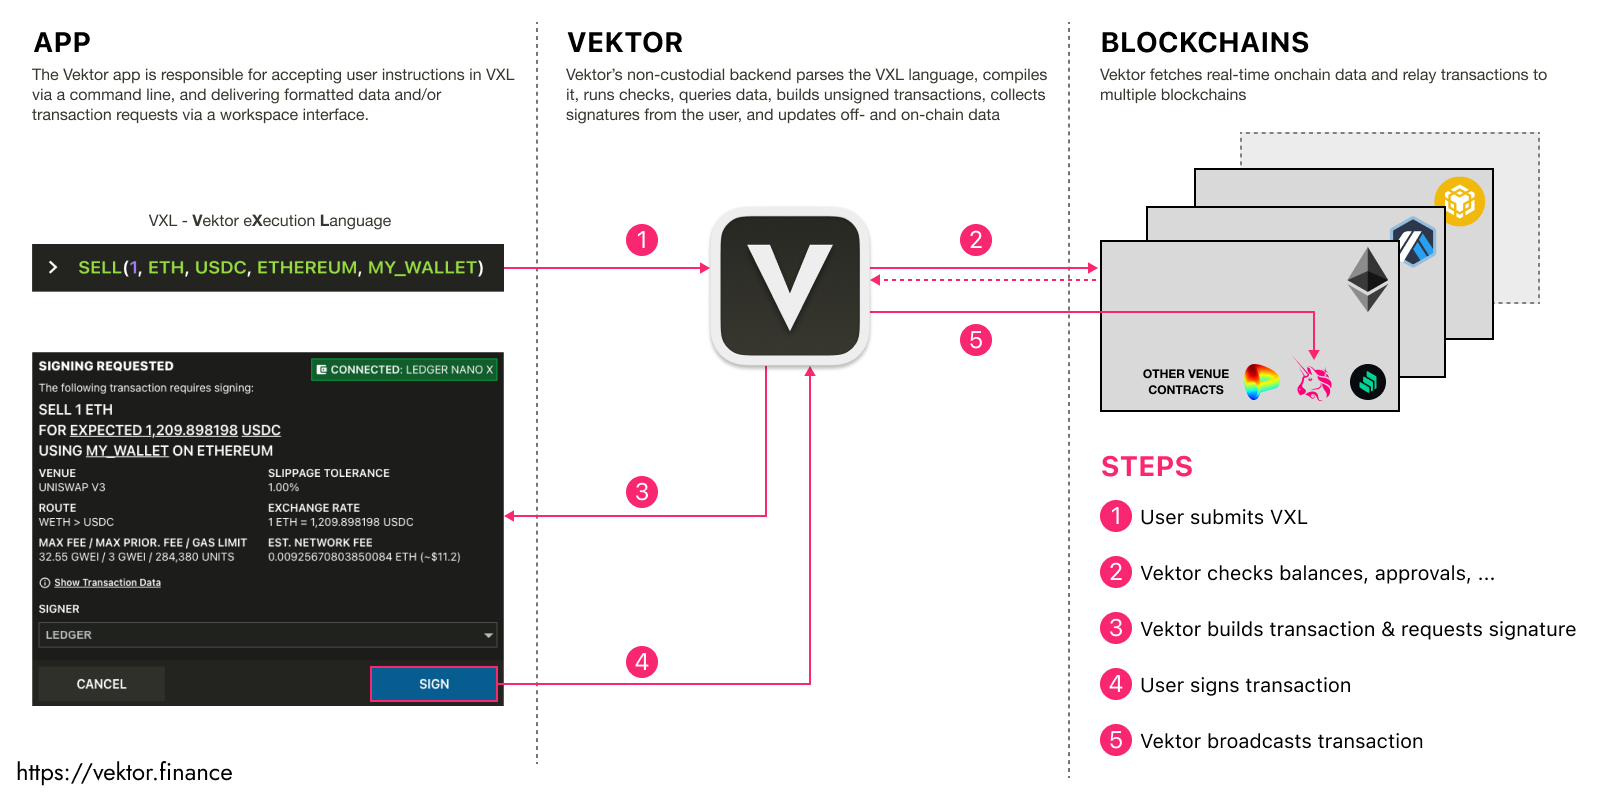 flow diagram divided into three zones: app, vektor, and blockchains, and arrows interconnecting different components. steps are 1, user submits VXL, 2, vektor checks balances & approvals etc., 3, vektor builds transaction and requests signature, 4, user signs transaction, 5, vektor broadcasts transaction